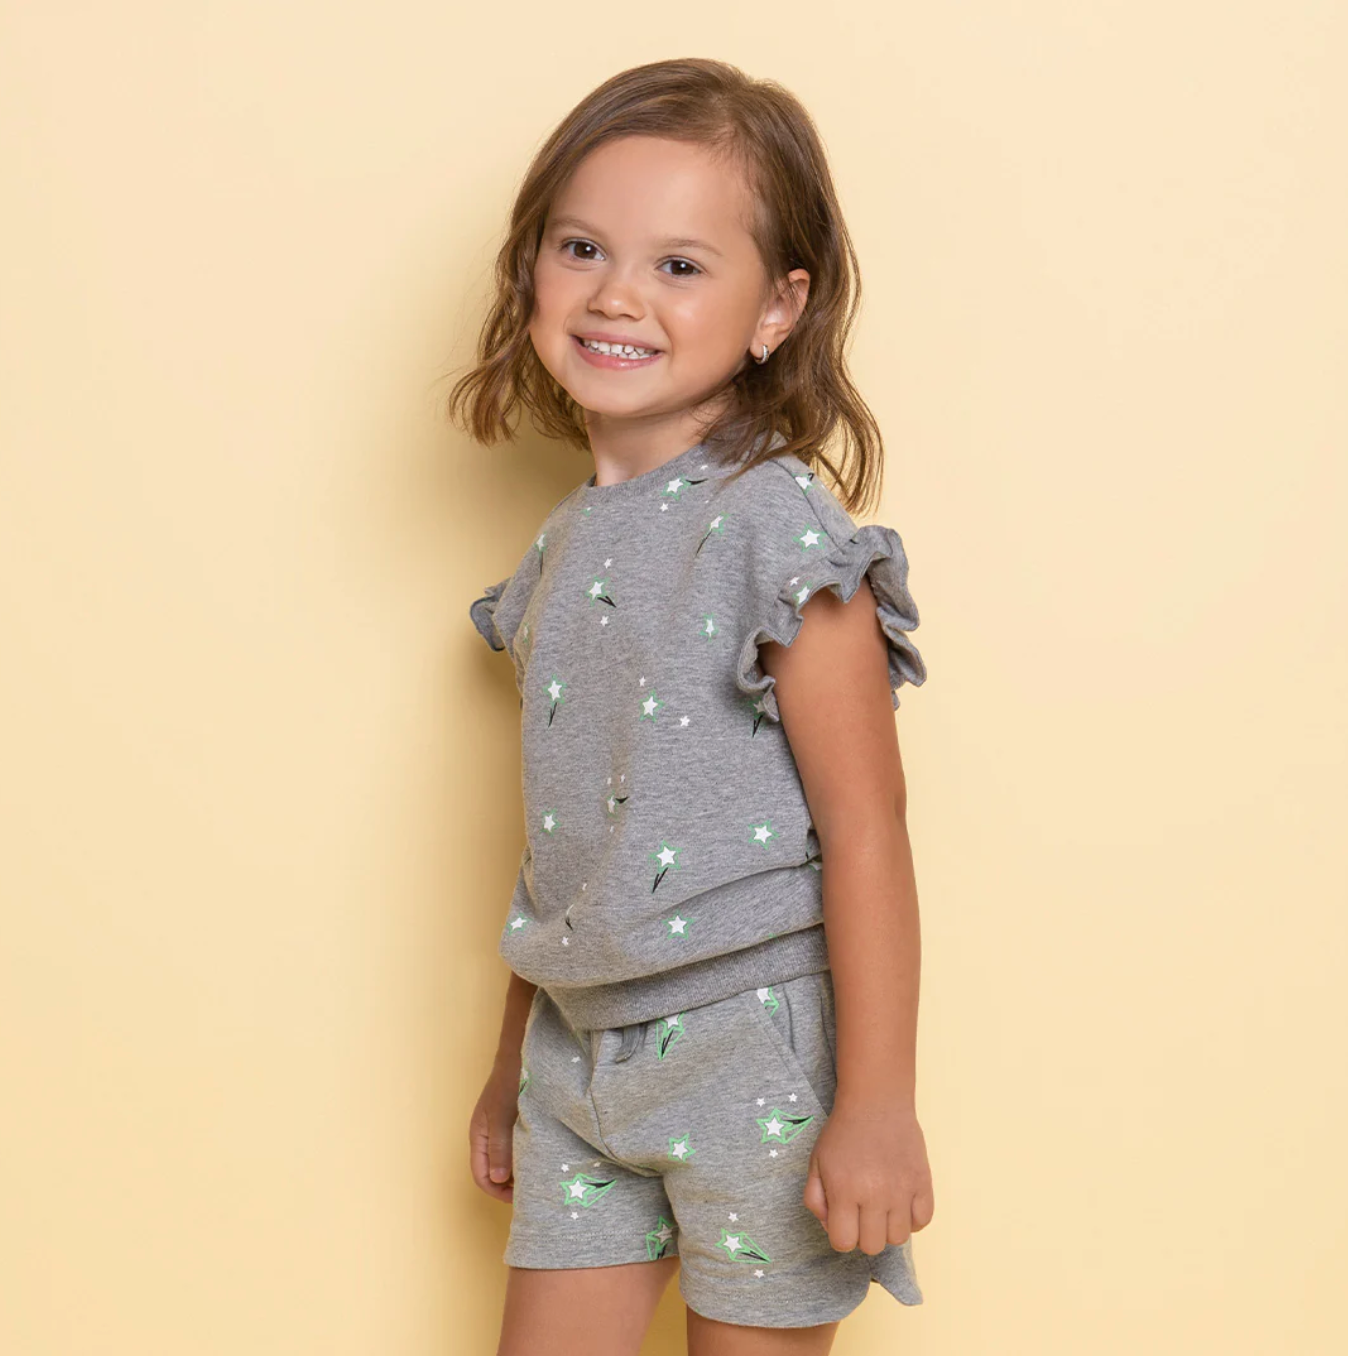 All Star Print on Heather Grey Girls' Terry Top